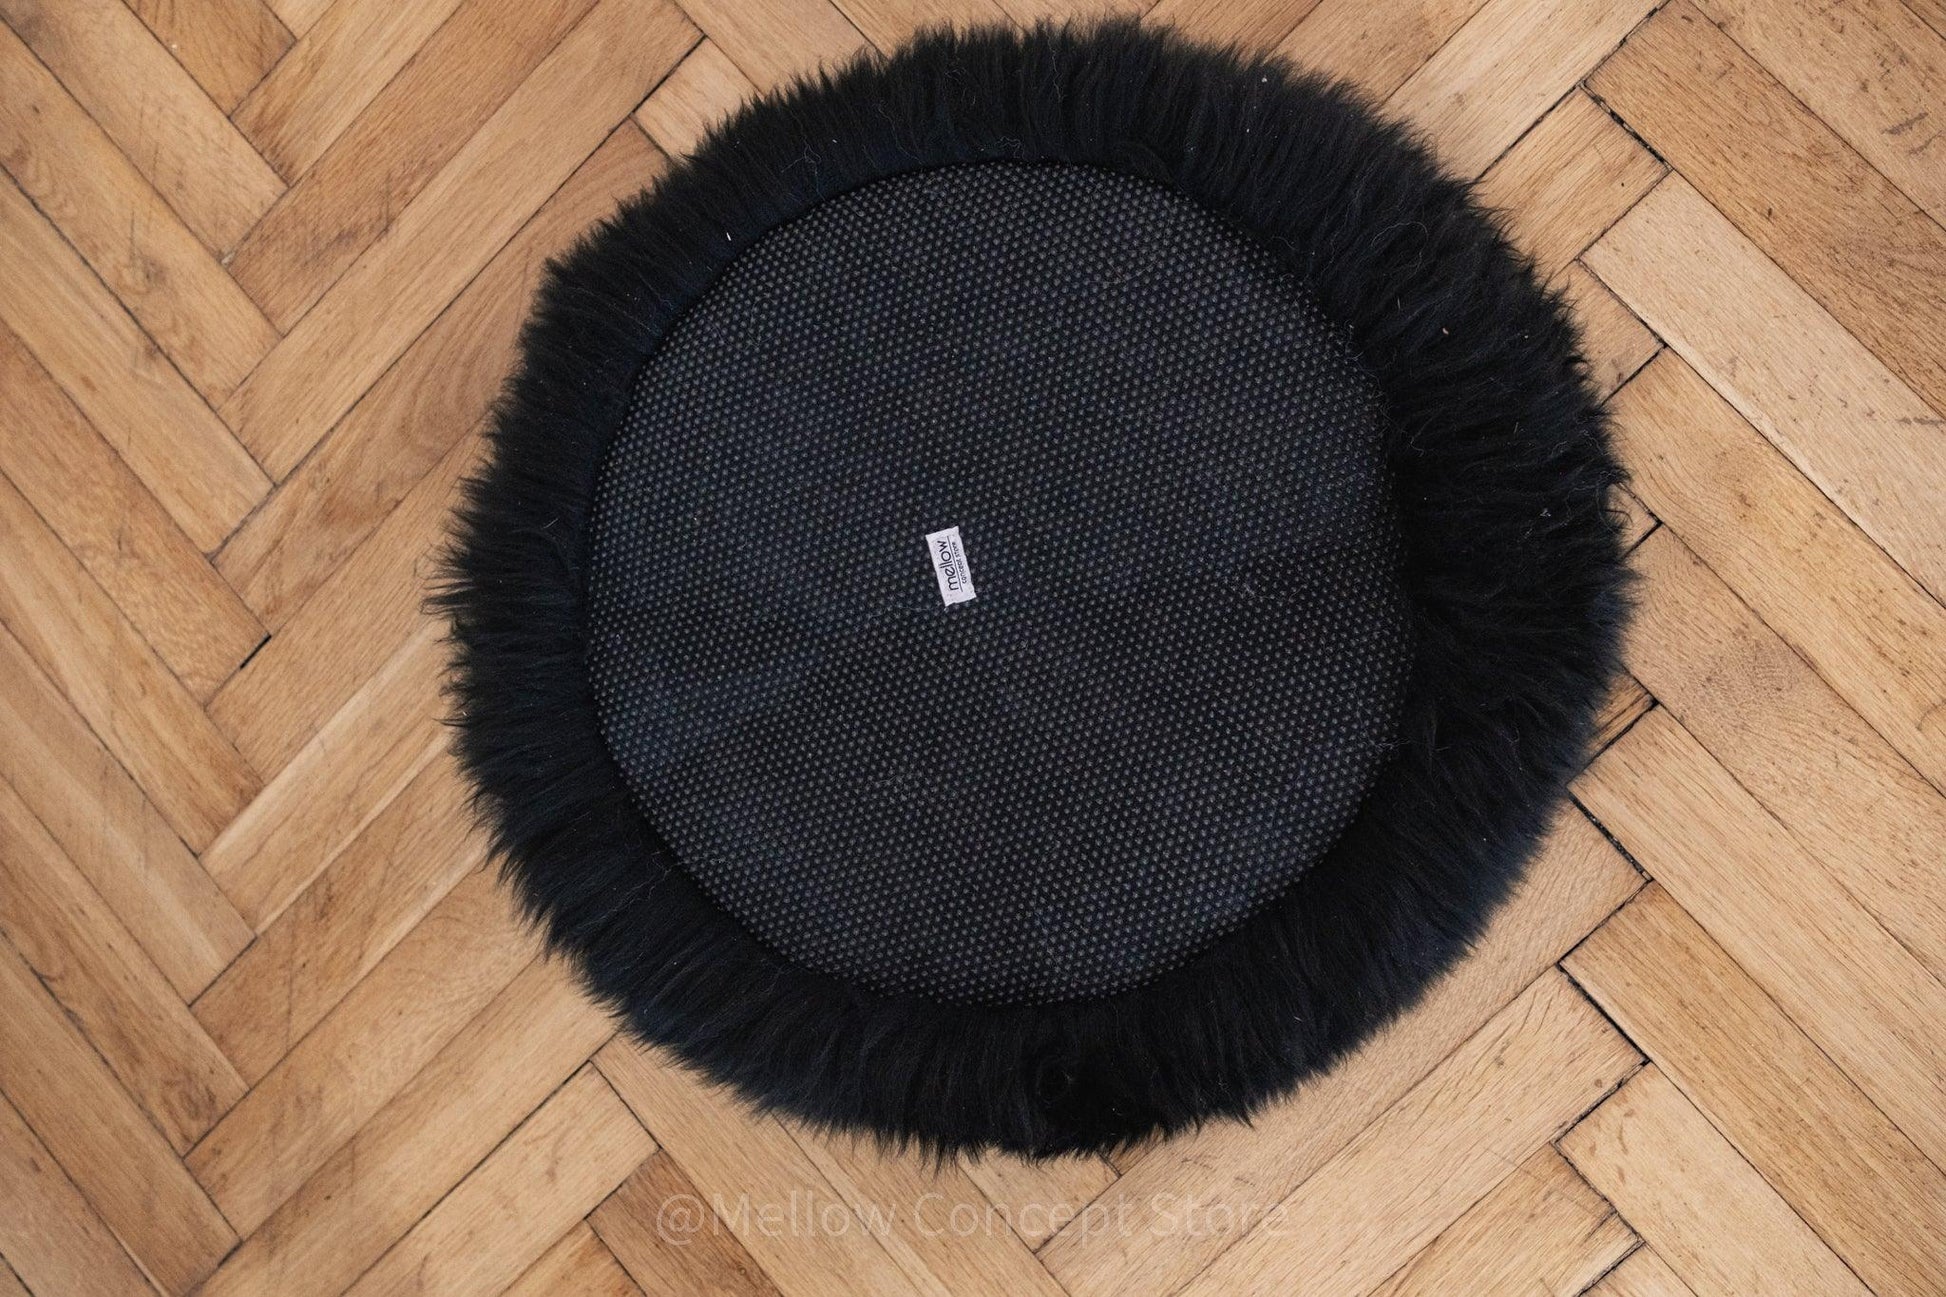 A round black fur rug on a wooden floor made from Mellow Pet Store's Round Natural Sheepskin Pet Bed in Black, creating an eco-friendly and luxurious addition to any room.